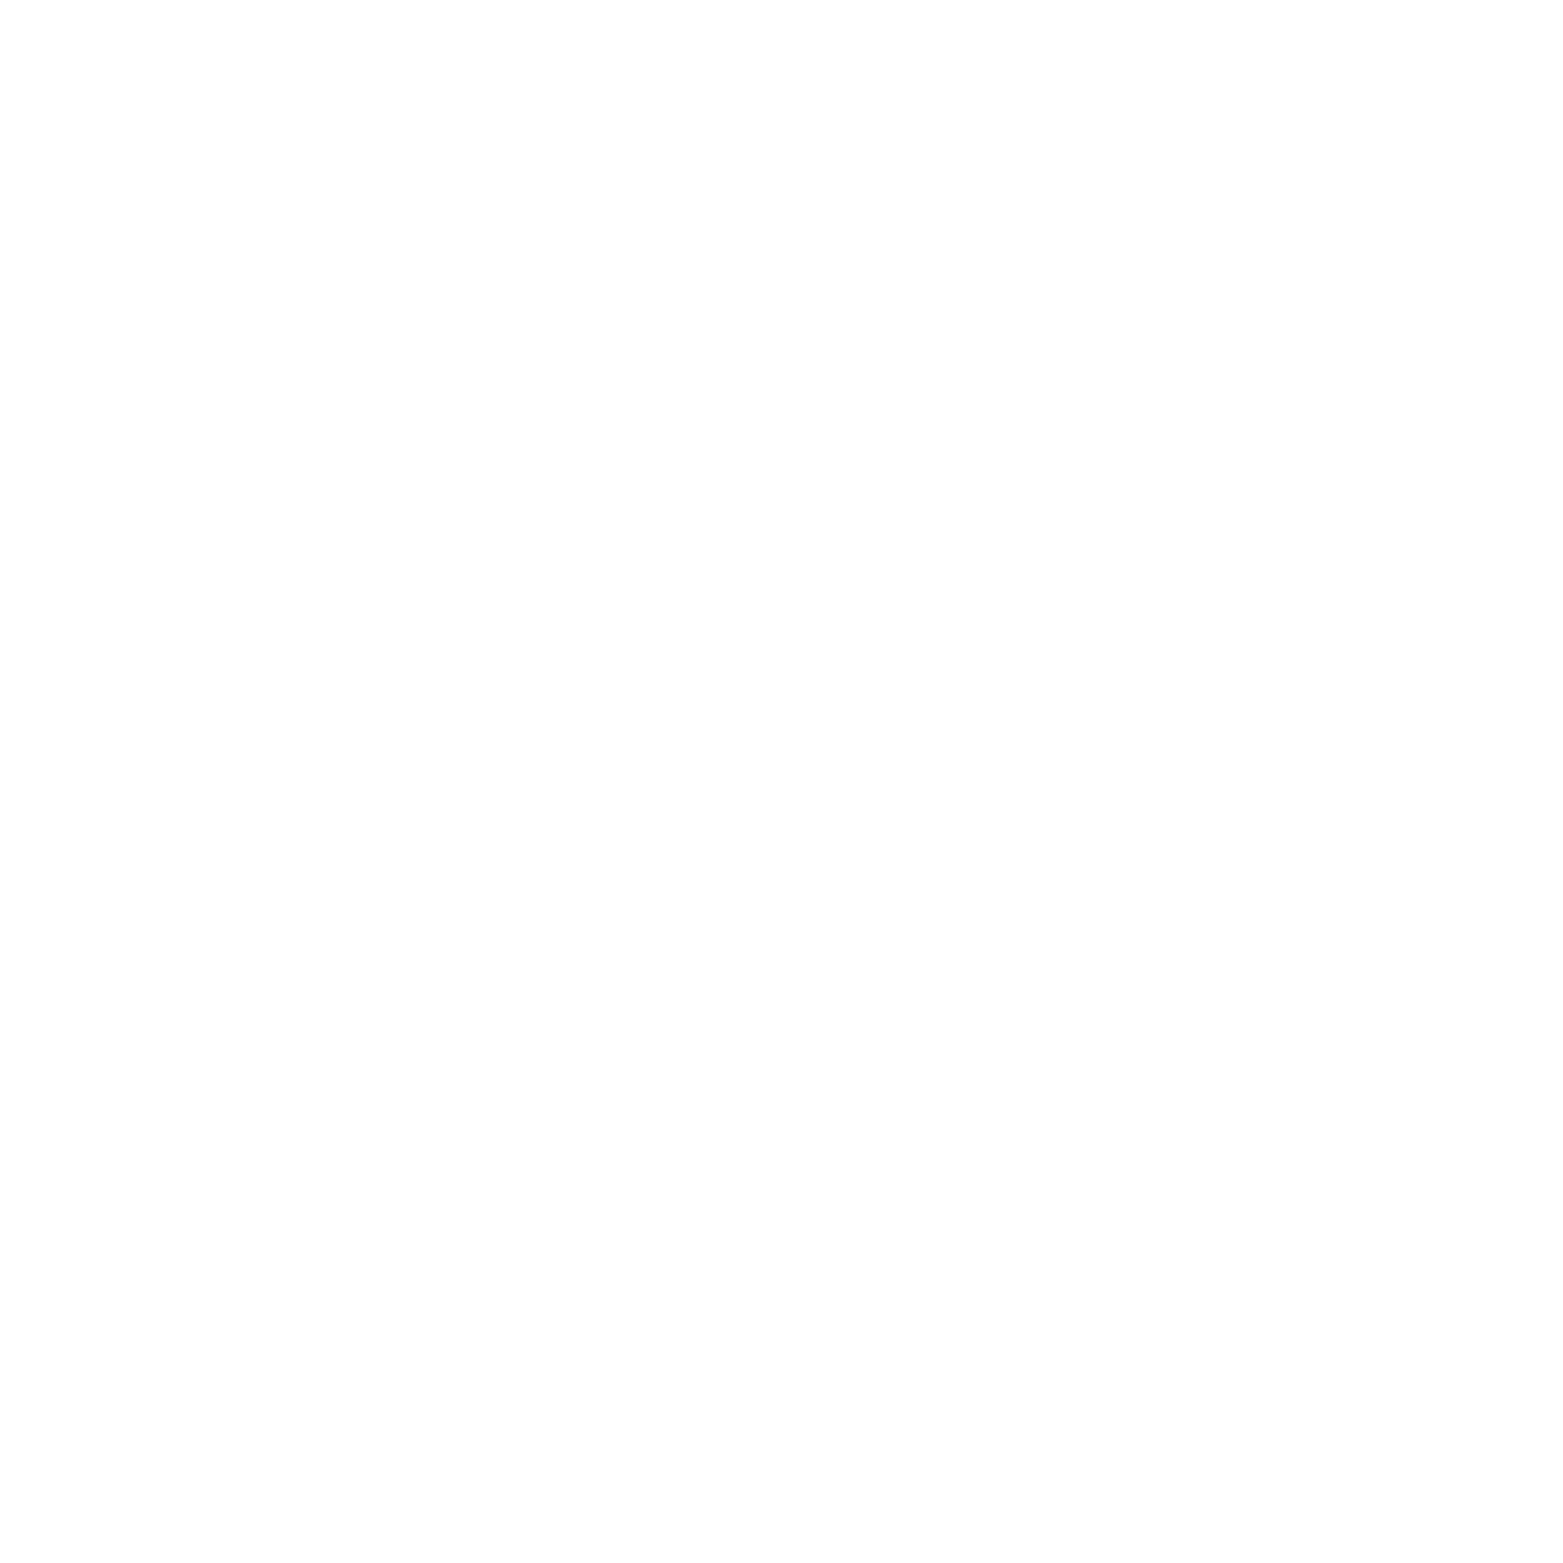 Dead Freedom